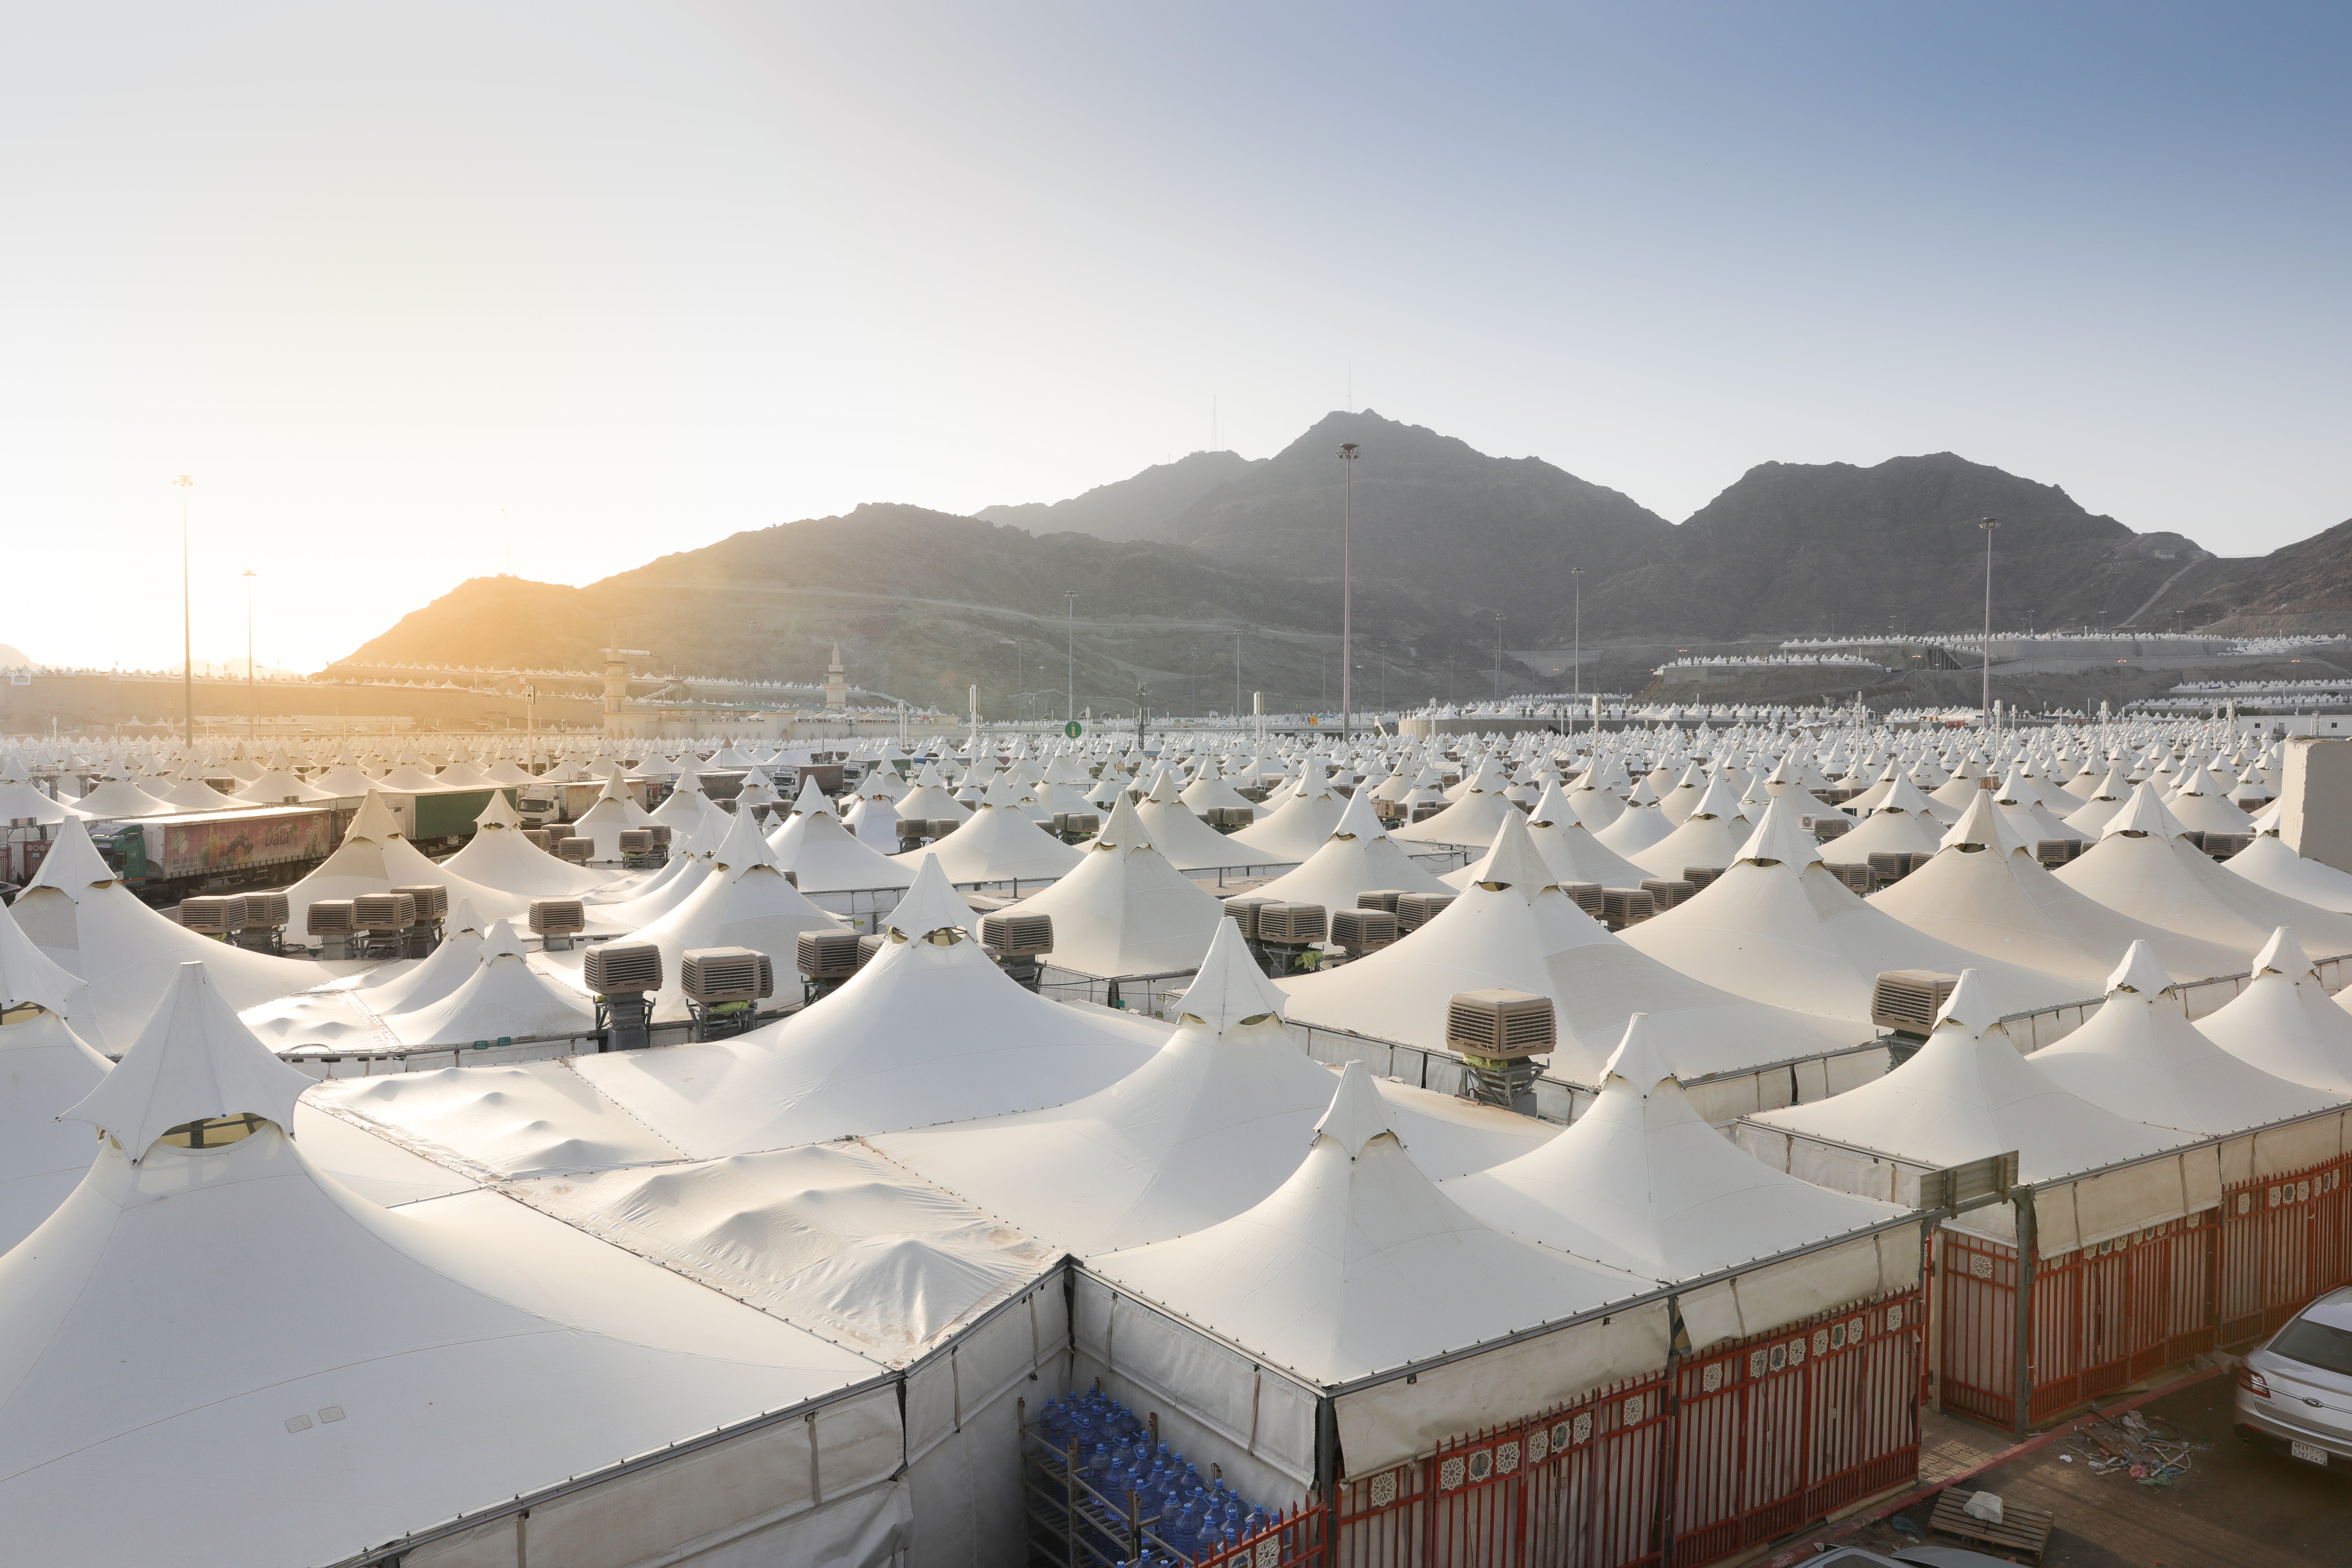 After this first stage of Hajj is completed, pilgrims go to Mina, a tent city roughly eight kilometres from Makkah